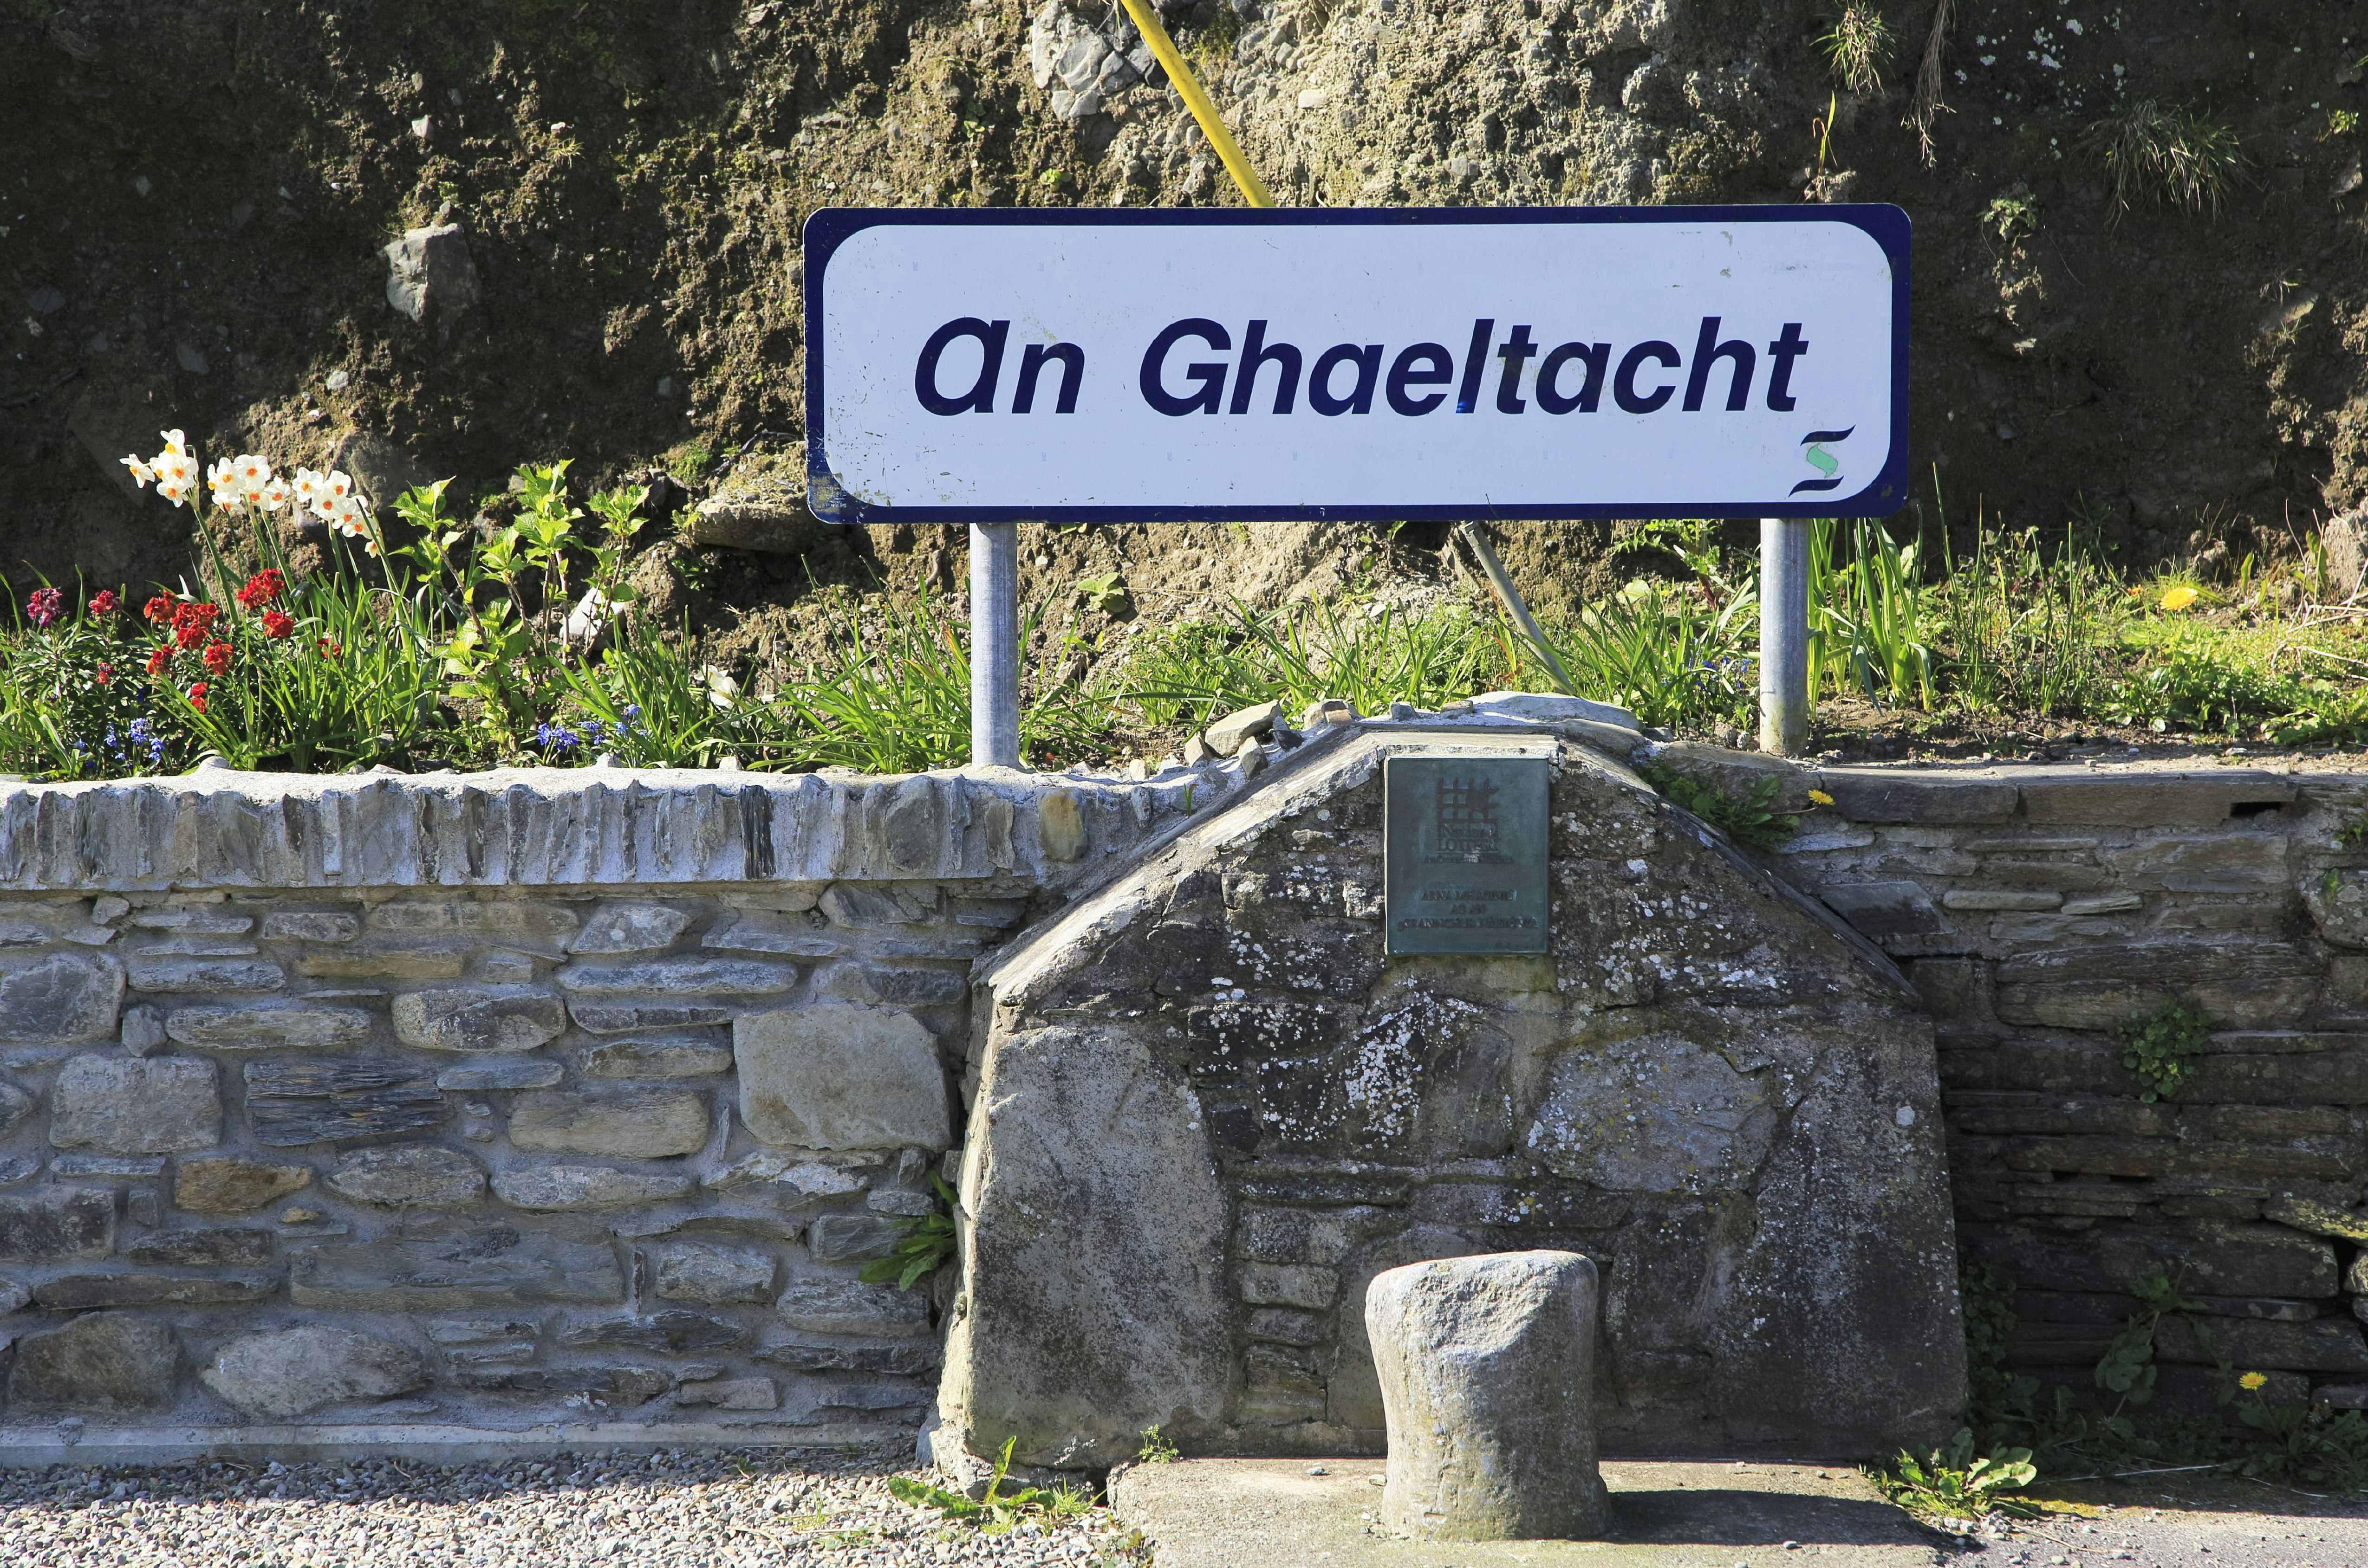 A white rectangular sign with rounded edges reads "an ghaeltacht"  in a blue italicized sans-serif font. It sits on a long low stone wall with a small illegible plaque just below the white sign. It indicates this is a place where Gaeilge is still the primary language